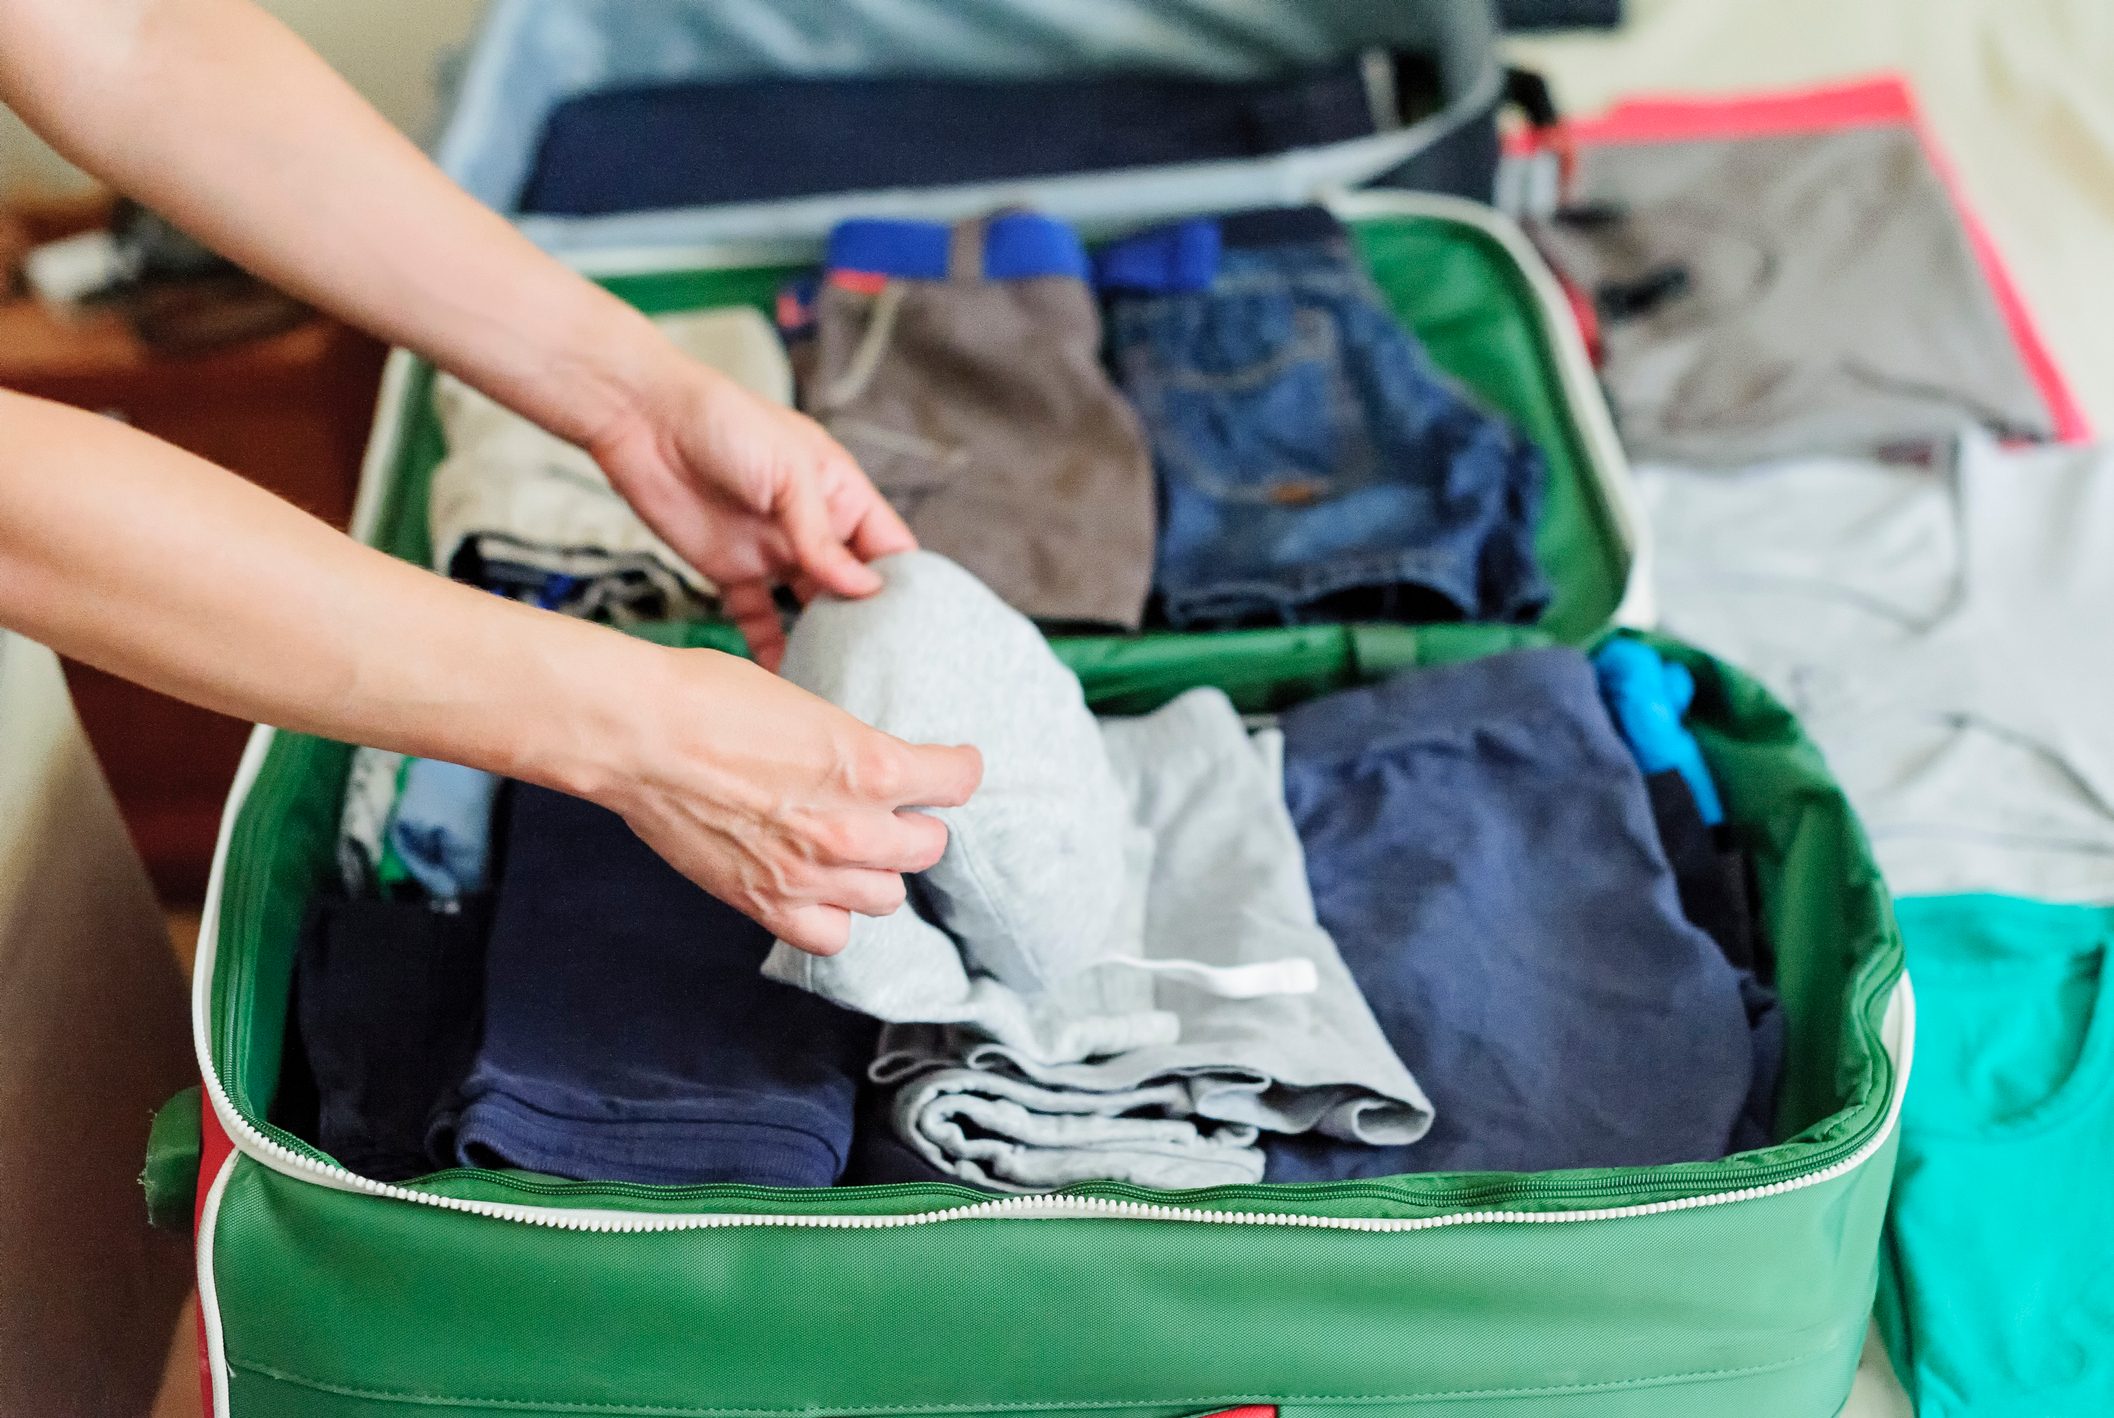 <p>Because you don't want to have to <a href="https://www.rd.com/article/steam-or-iron-your-clothes/" rel="noopener noreferrer">iron or steam</a> your clothes when you get to your destination (and you definitely don't want to make room for the travel-size devices), make sure you pack clothing items that will travel well—that means no linens or cotton twills that wrinkle easily. Wrinkle-resistant knits and stretchy fabrics are great choices.</p> <p>Wondering <a href="https://www.rd.com/list/shouldnt-wear-on-airplane/" rel="noopener noreferrer">what to wear on a plane</a>? Layer and wear your bulkiest items, when possible. Choose travel-ready, comfortable fabrics, like the ones in this <a href="https://lunya.co/products/womens-the-travel-kit" rel="noopener noreferrer">travel kit</a> (bonus if they encourage blood flow). If you're taking a long trip, look for fabrics that are odor-resistant and quick drying as well so you can wear them more than once and rinse them out in your hotel sink.</p> <p class="listicle-page__cta-button-shop"><a class="shop-btn" href="https://lunya.co/products/womens-the-travel-kit">Shop the Travel Kit</a></p>